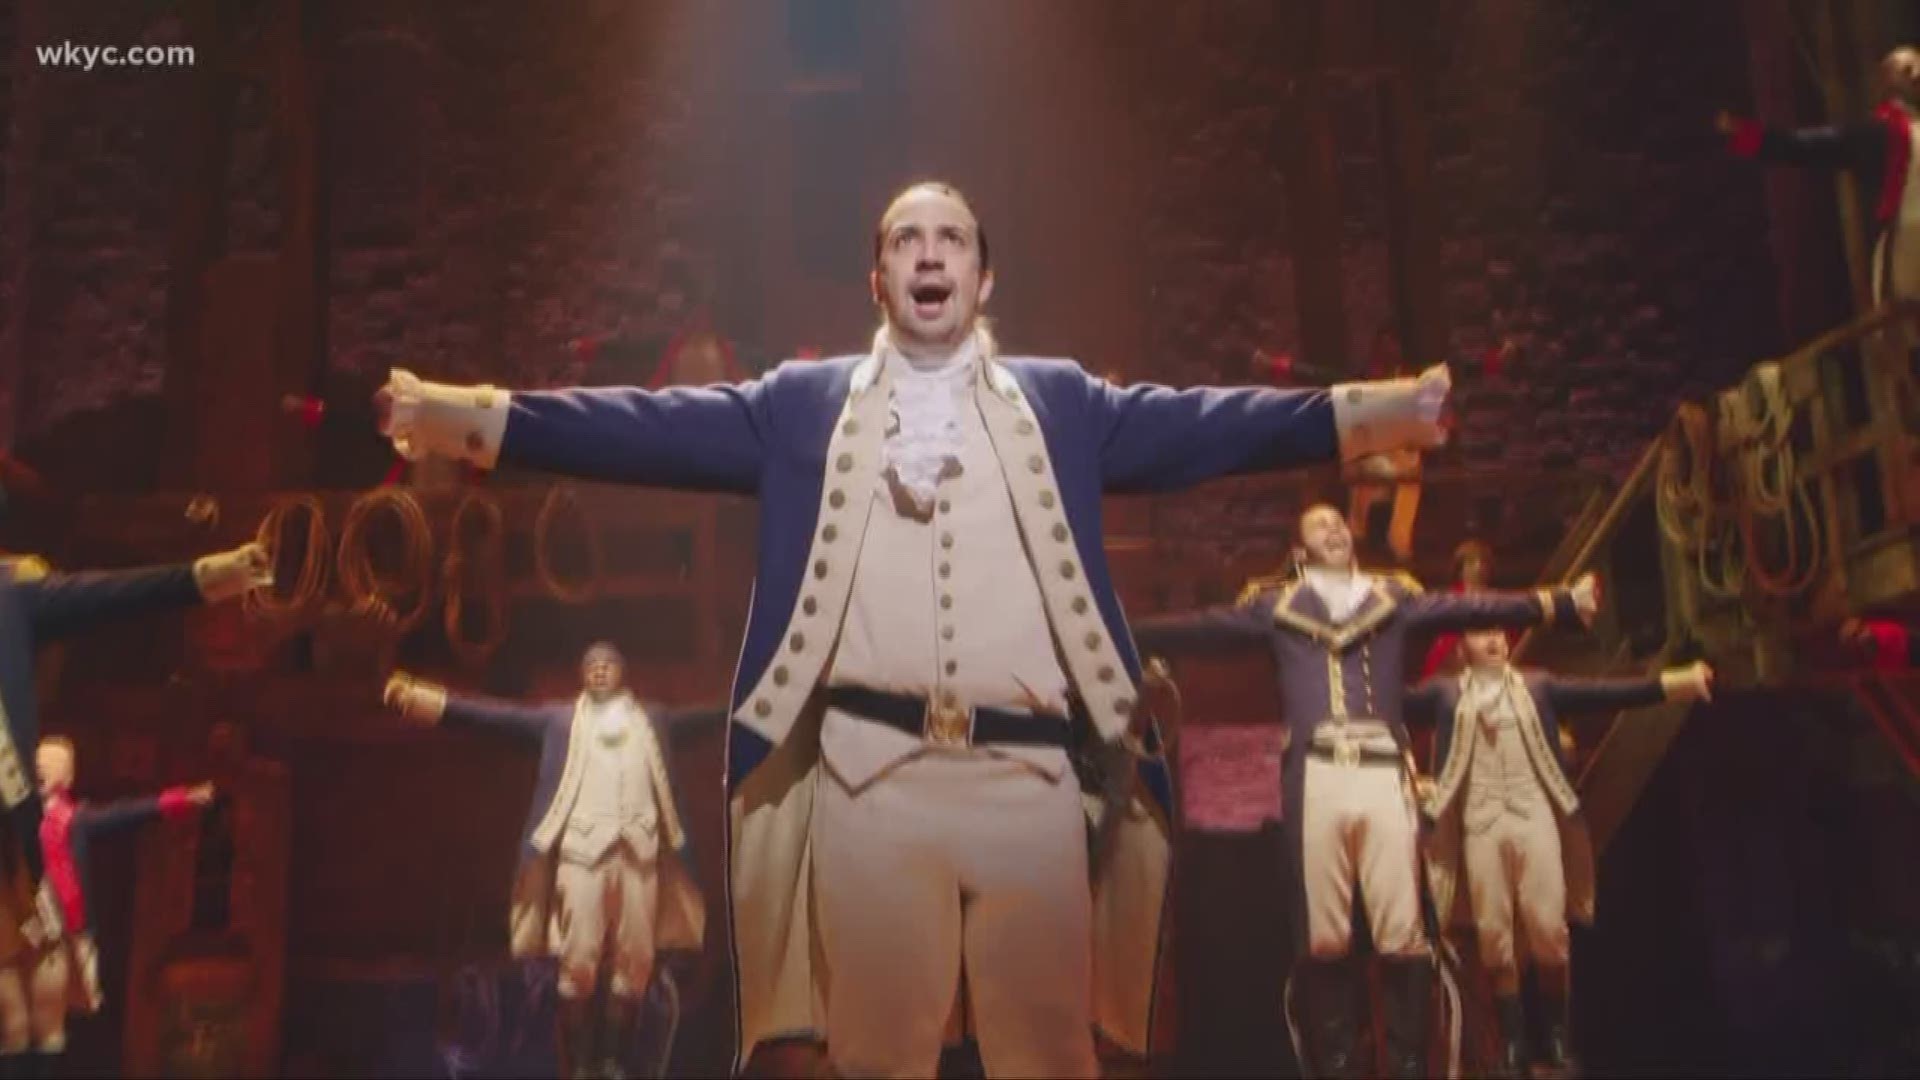 July 17, 2018: It's here! 'Hamilton' is at Playhouse Square in Cleveland for 48 performances.